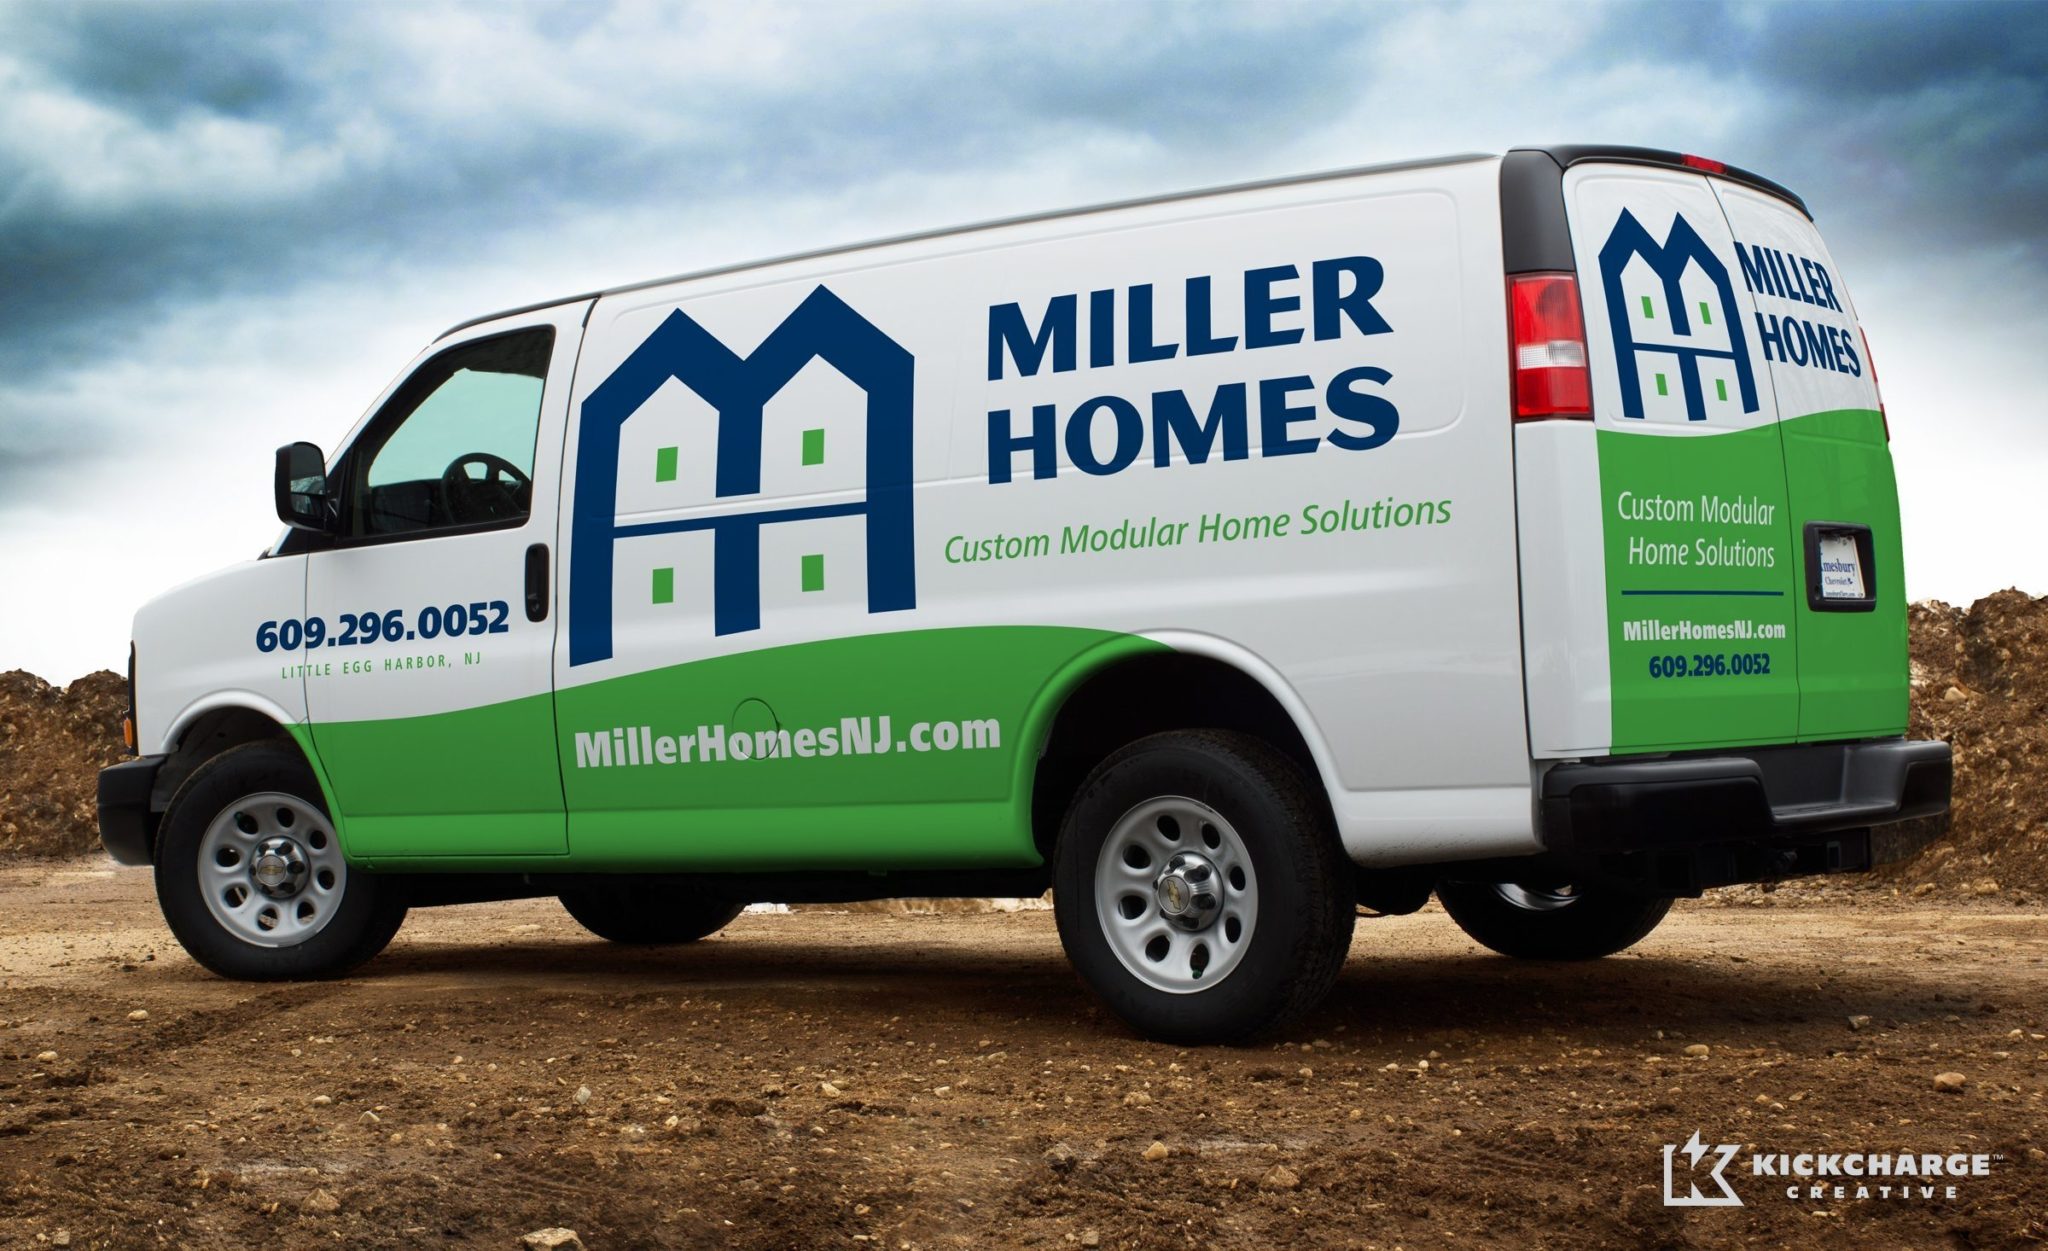 After the branding was complete, we designed this simple, yet effective layout for this homebuilder in Egg Harbor, NJ.